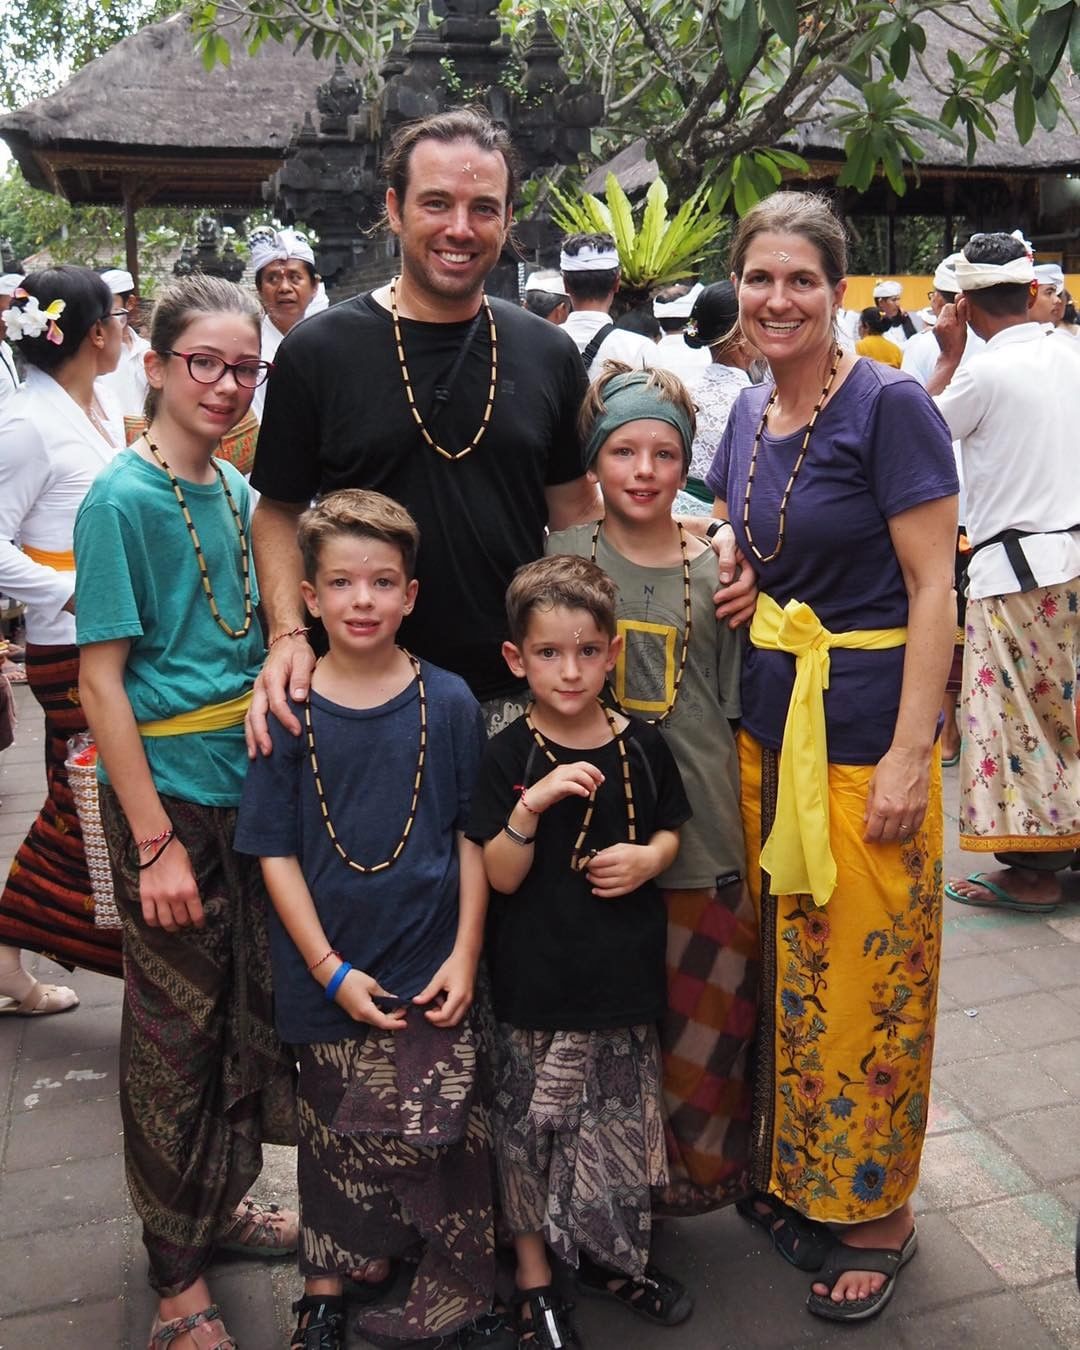 Edith Lemay, Sebastien Pelletier, and their 4 children pose in Indonesia.